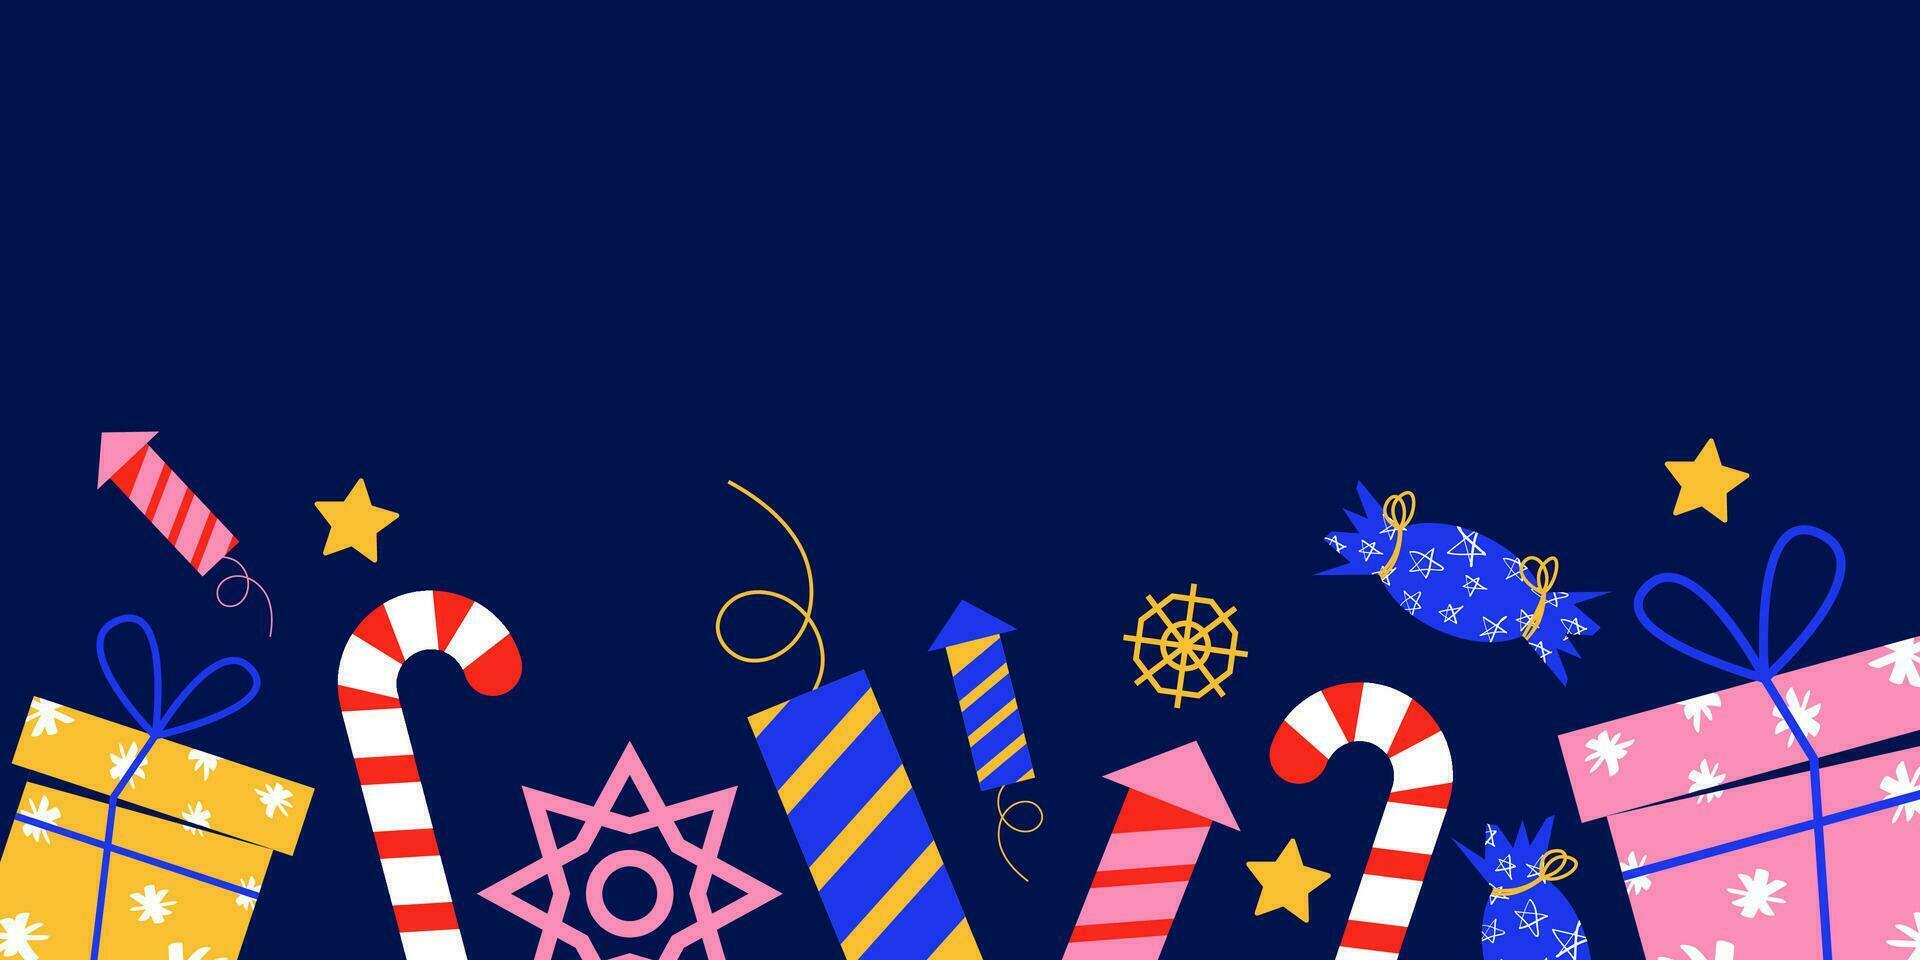 New Year background with gifts. Vector blue background with place for text. Multi-colored gifts and holiday elements. Lollipop, firecrackers, star.